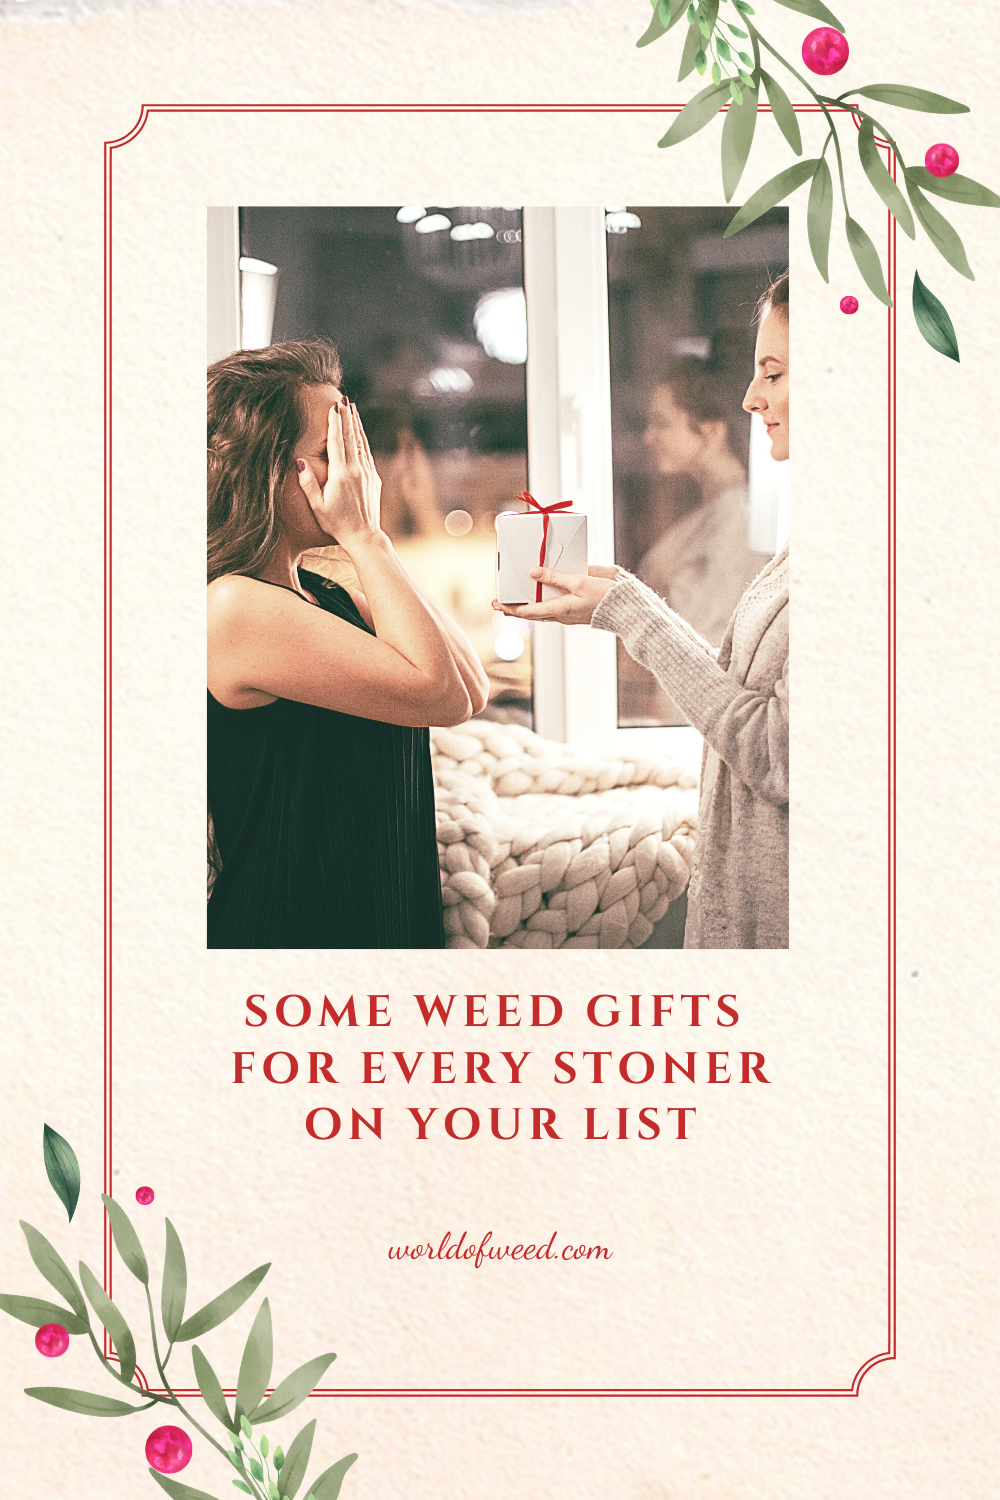 Some Weed Gifts for Every Stoner on Your List